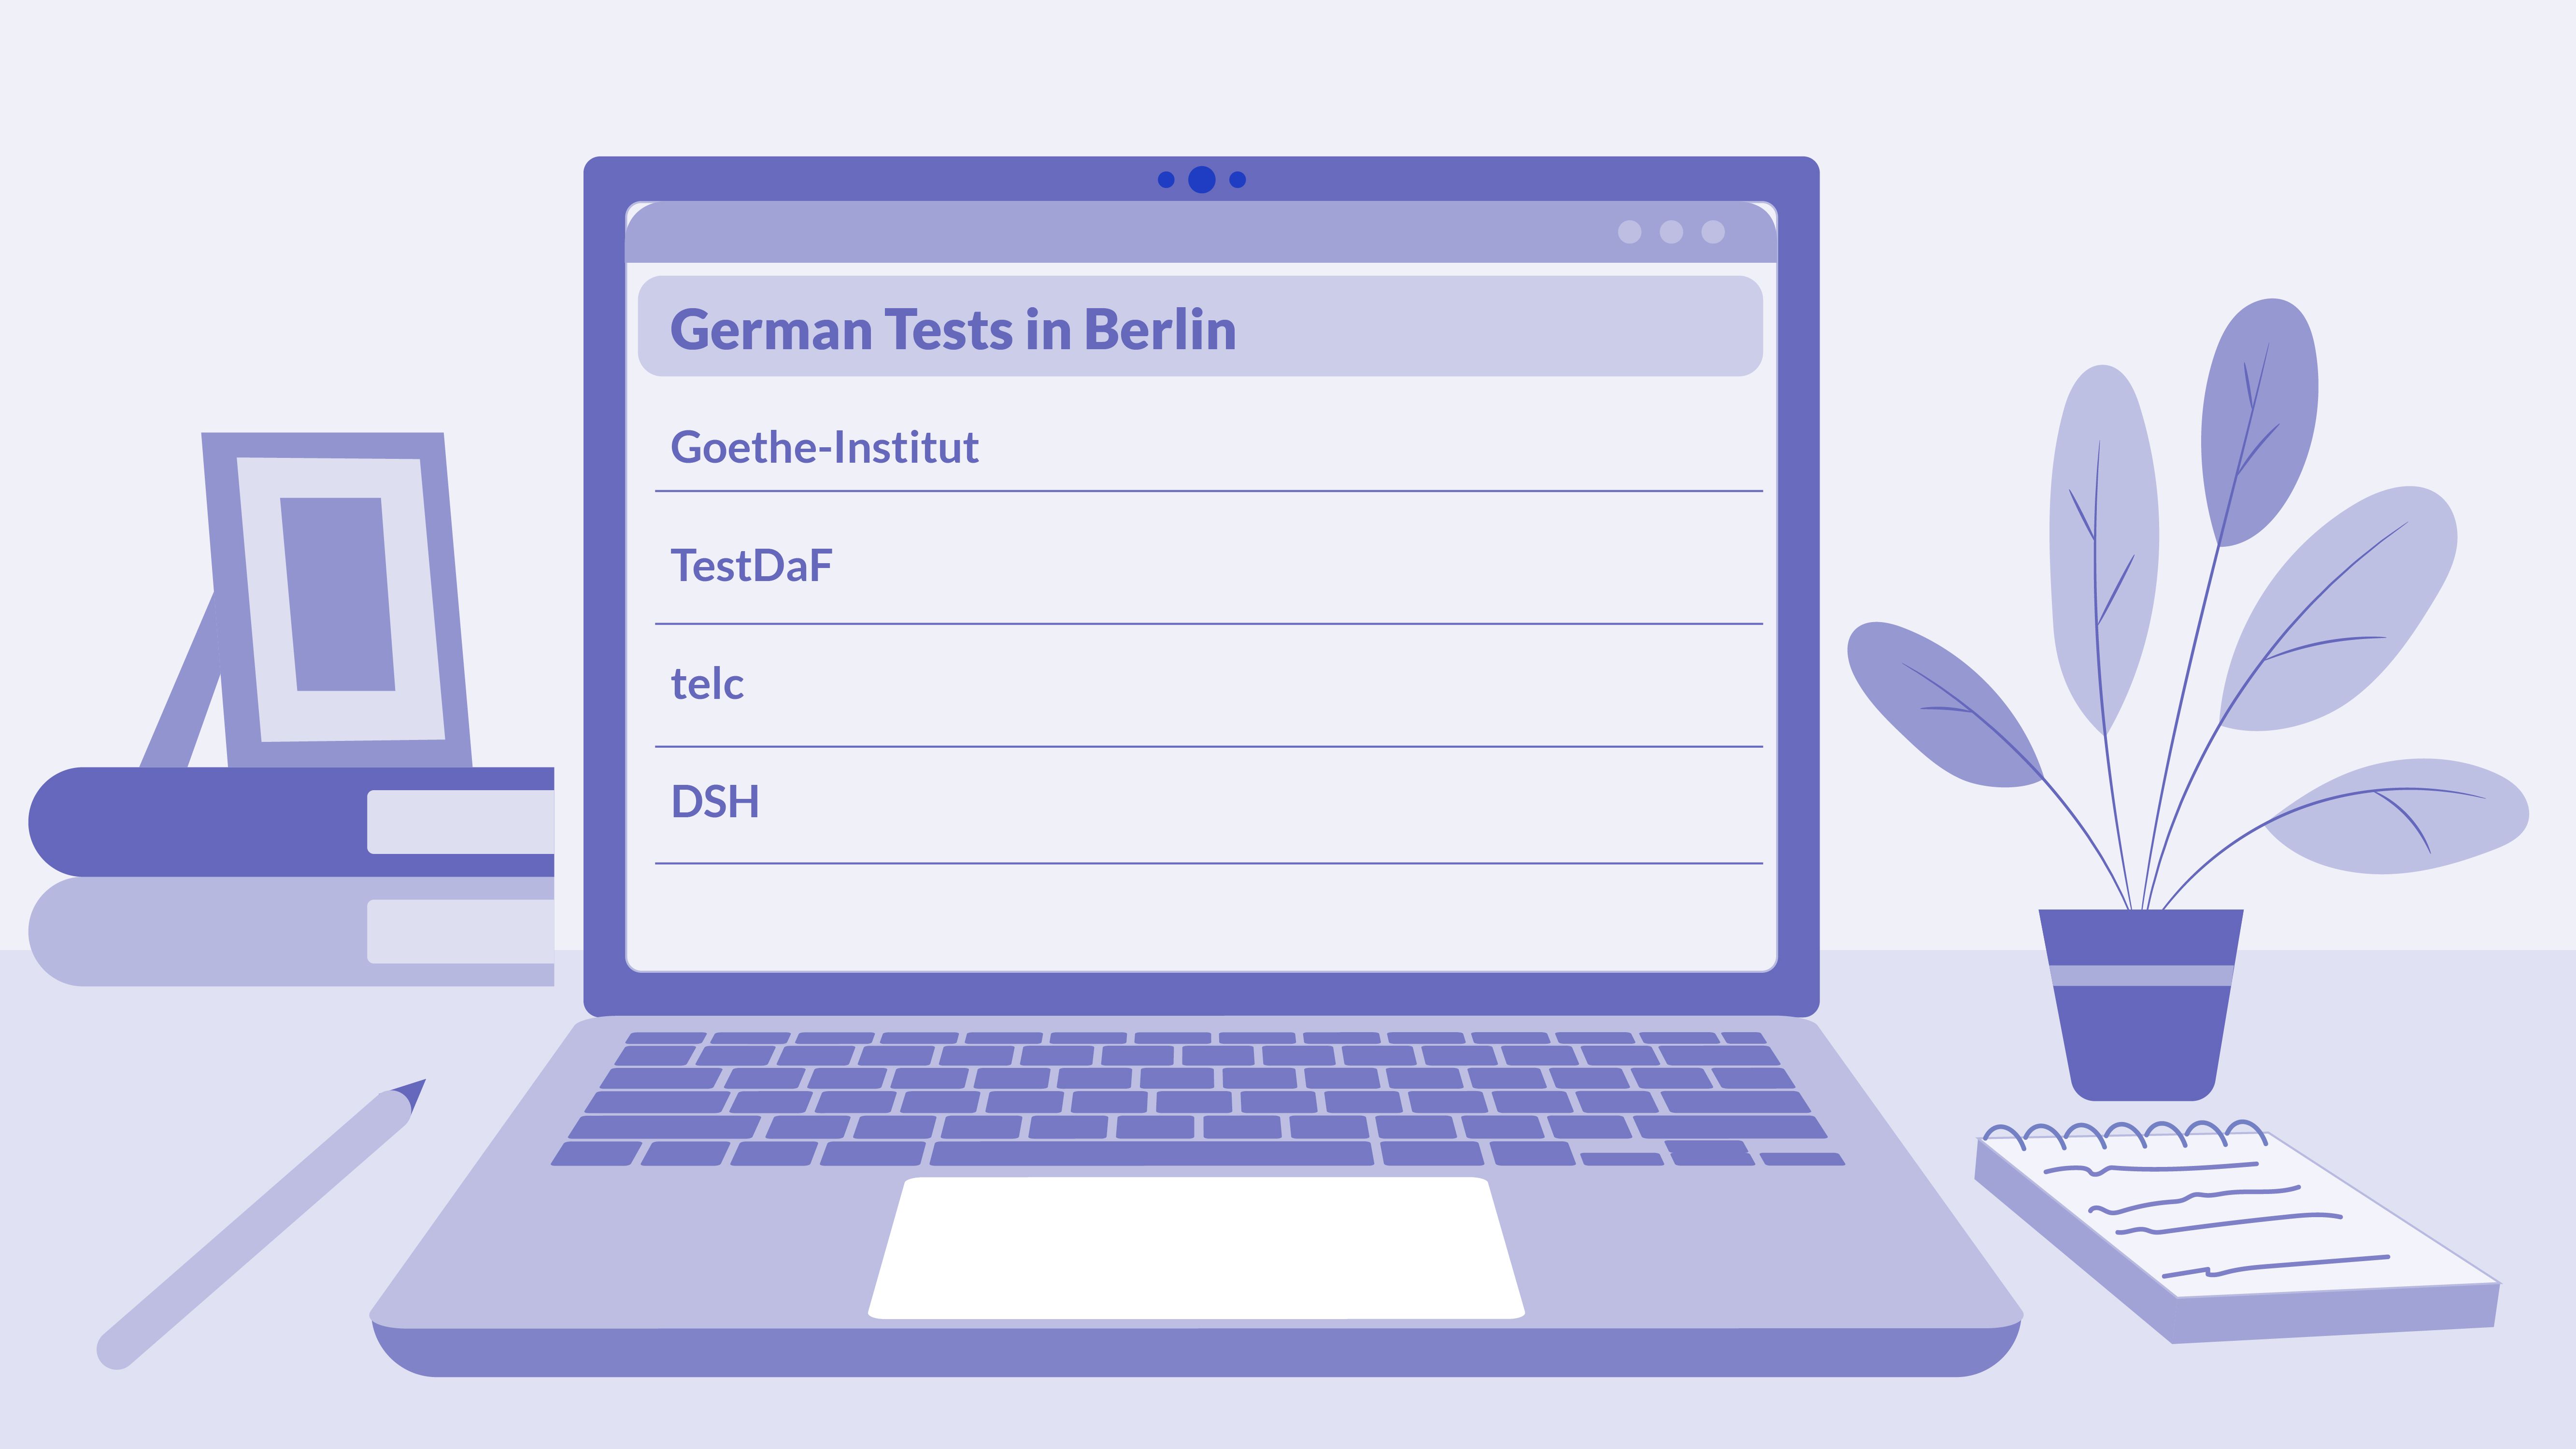 An illustration of the result page for the search request “German Tests in Berlin” showing the following testing options: Goethe-Institut. TestDaF, telc, DSH.